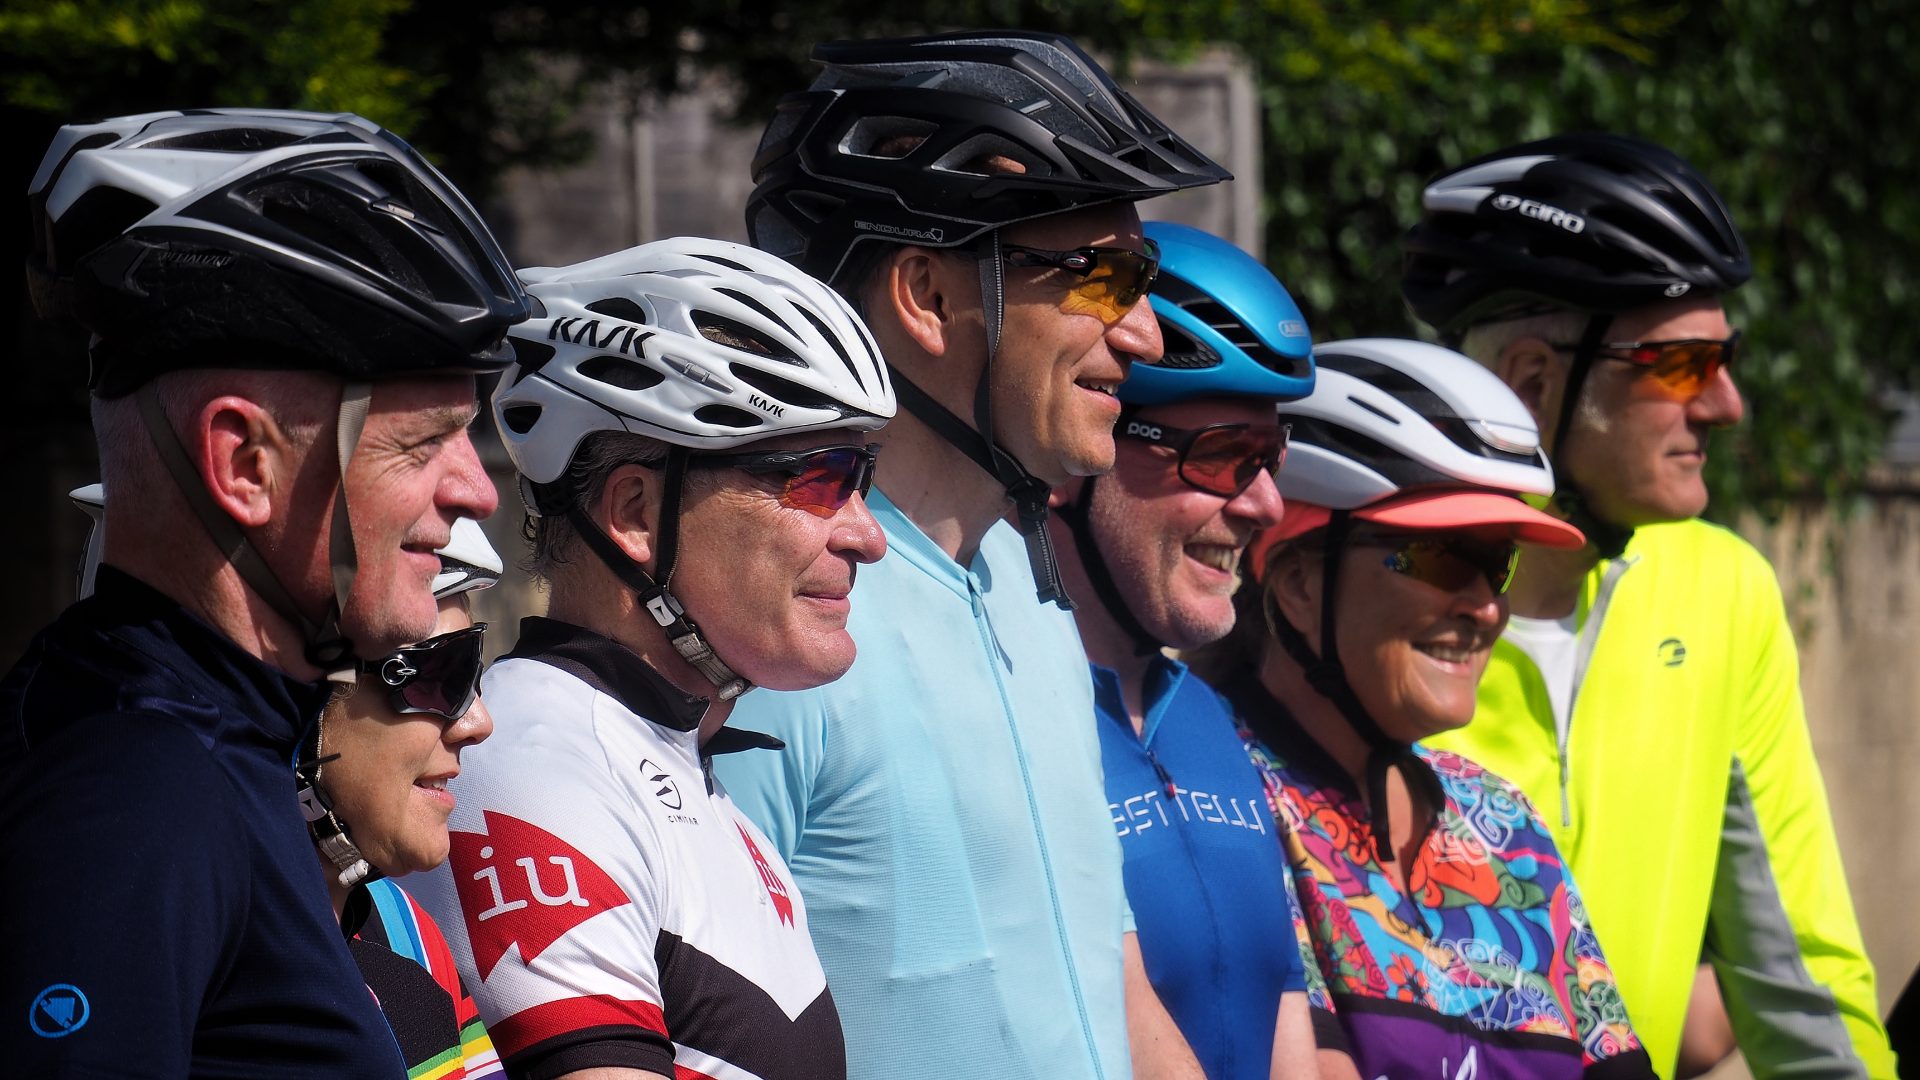 Tour d'Oxford riders line up at the start line of IntoUniversity's 2022 charity bike ride